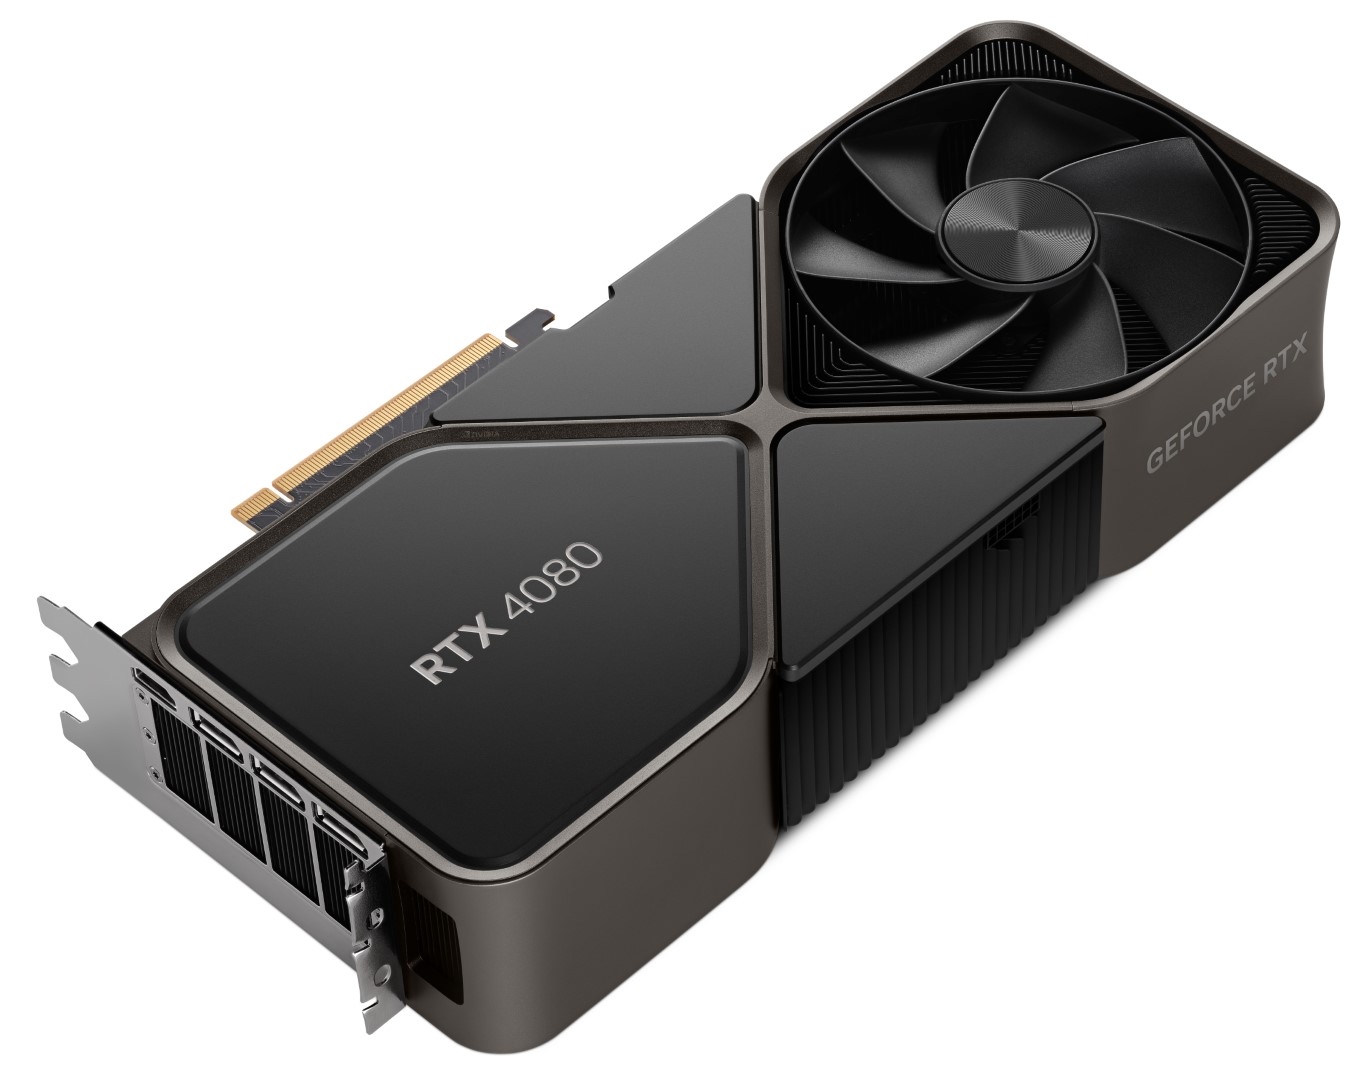 Nvidia GeForce RTX 4080 Review: Great Performance, Poor Pricing 